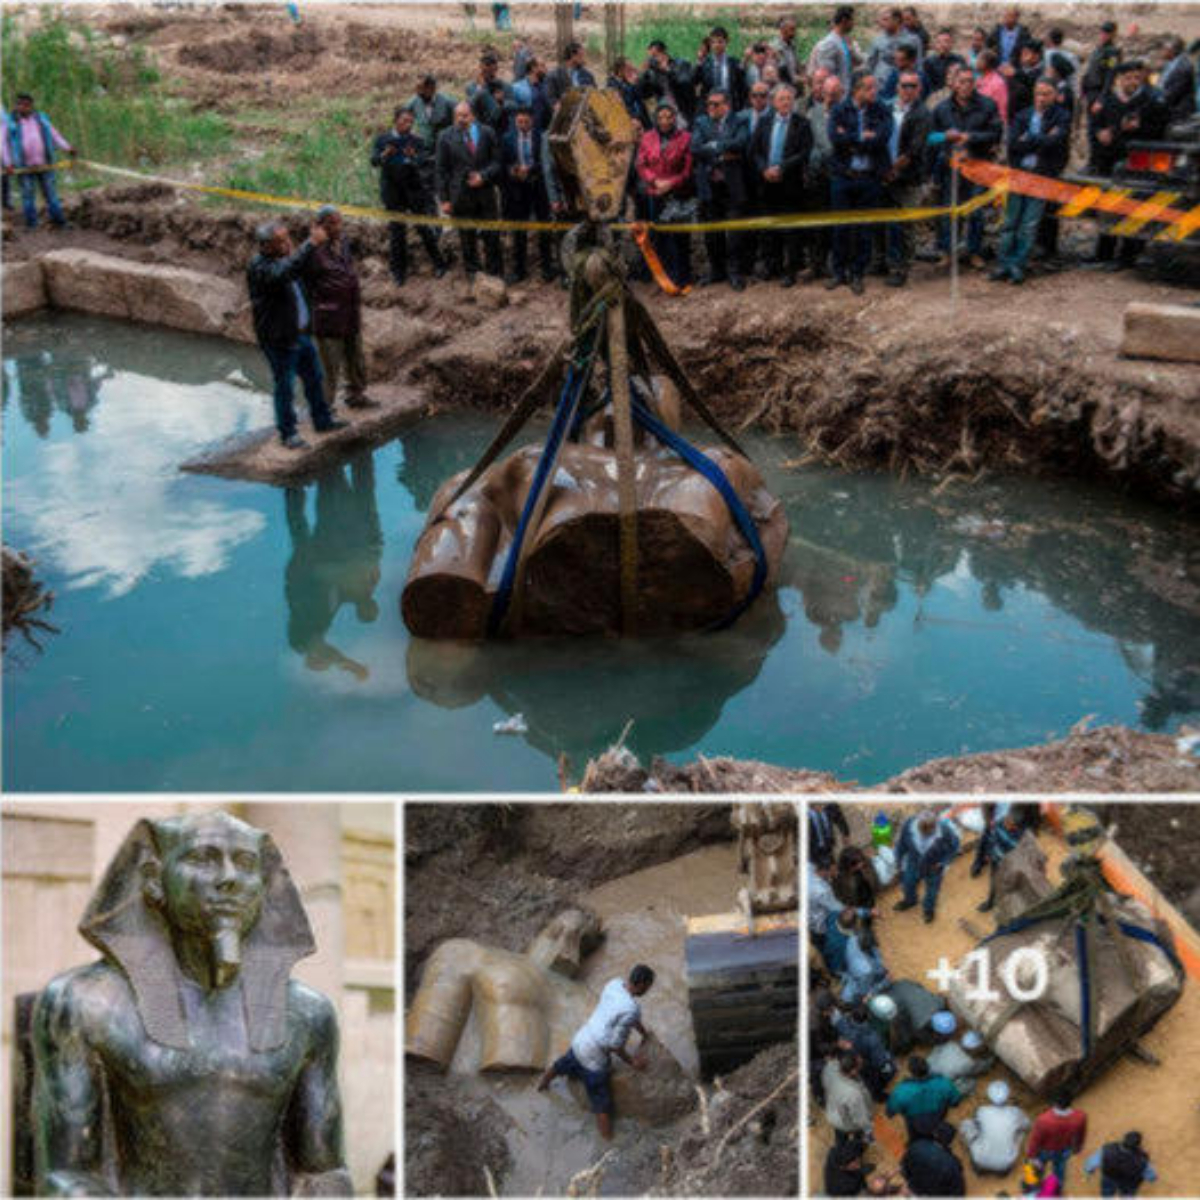 Archaeologists lift a 3,000-year-old Egyptian Pharaoh statue considered “one of the most important discoveries ever” from muddy ditch in Cairo